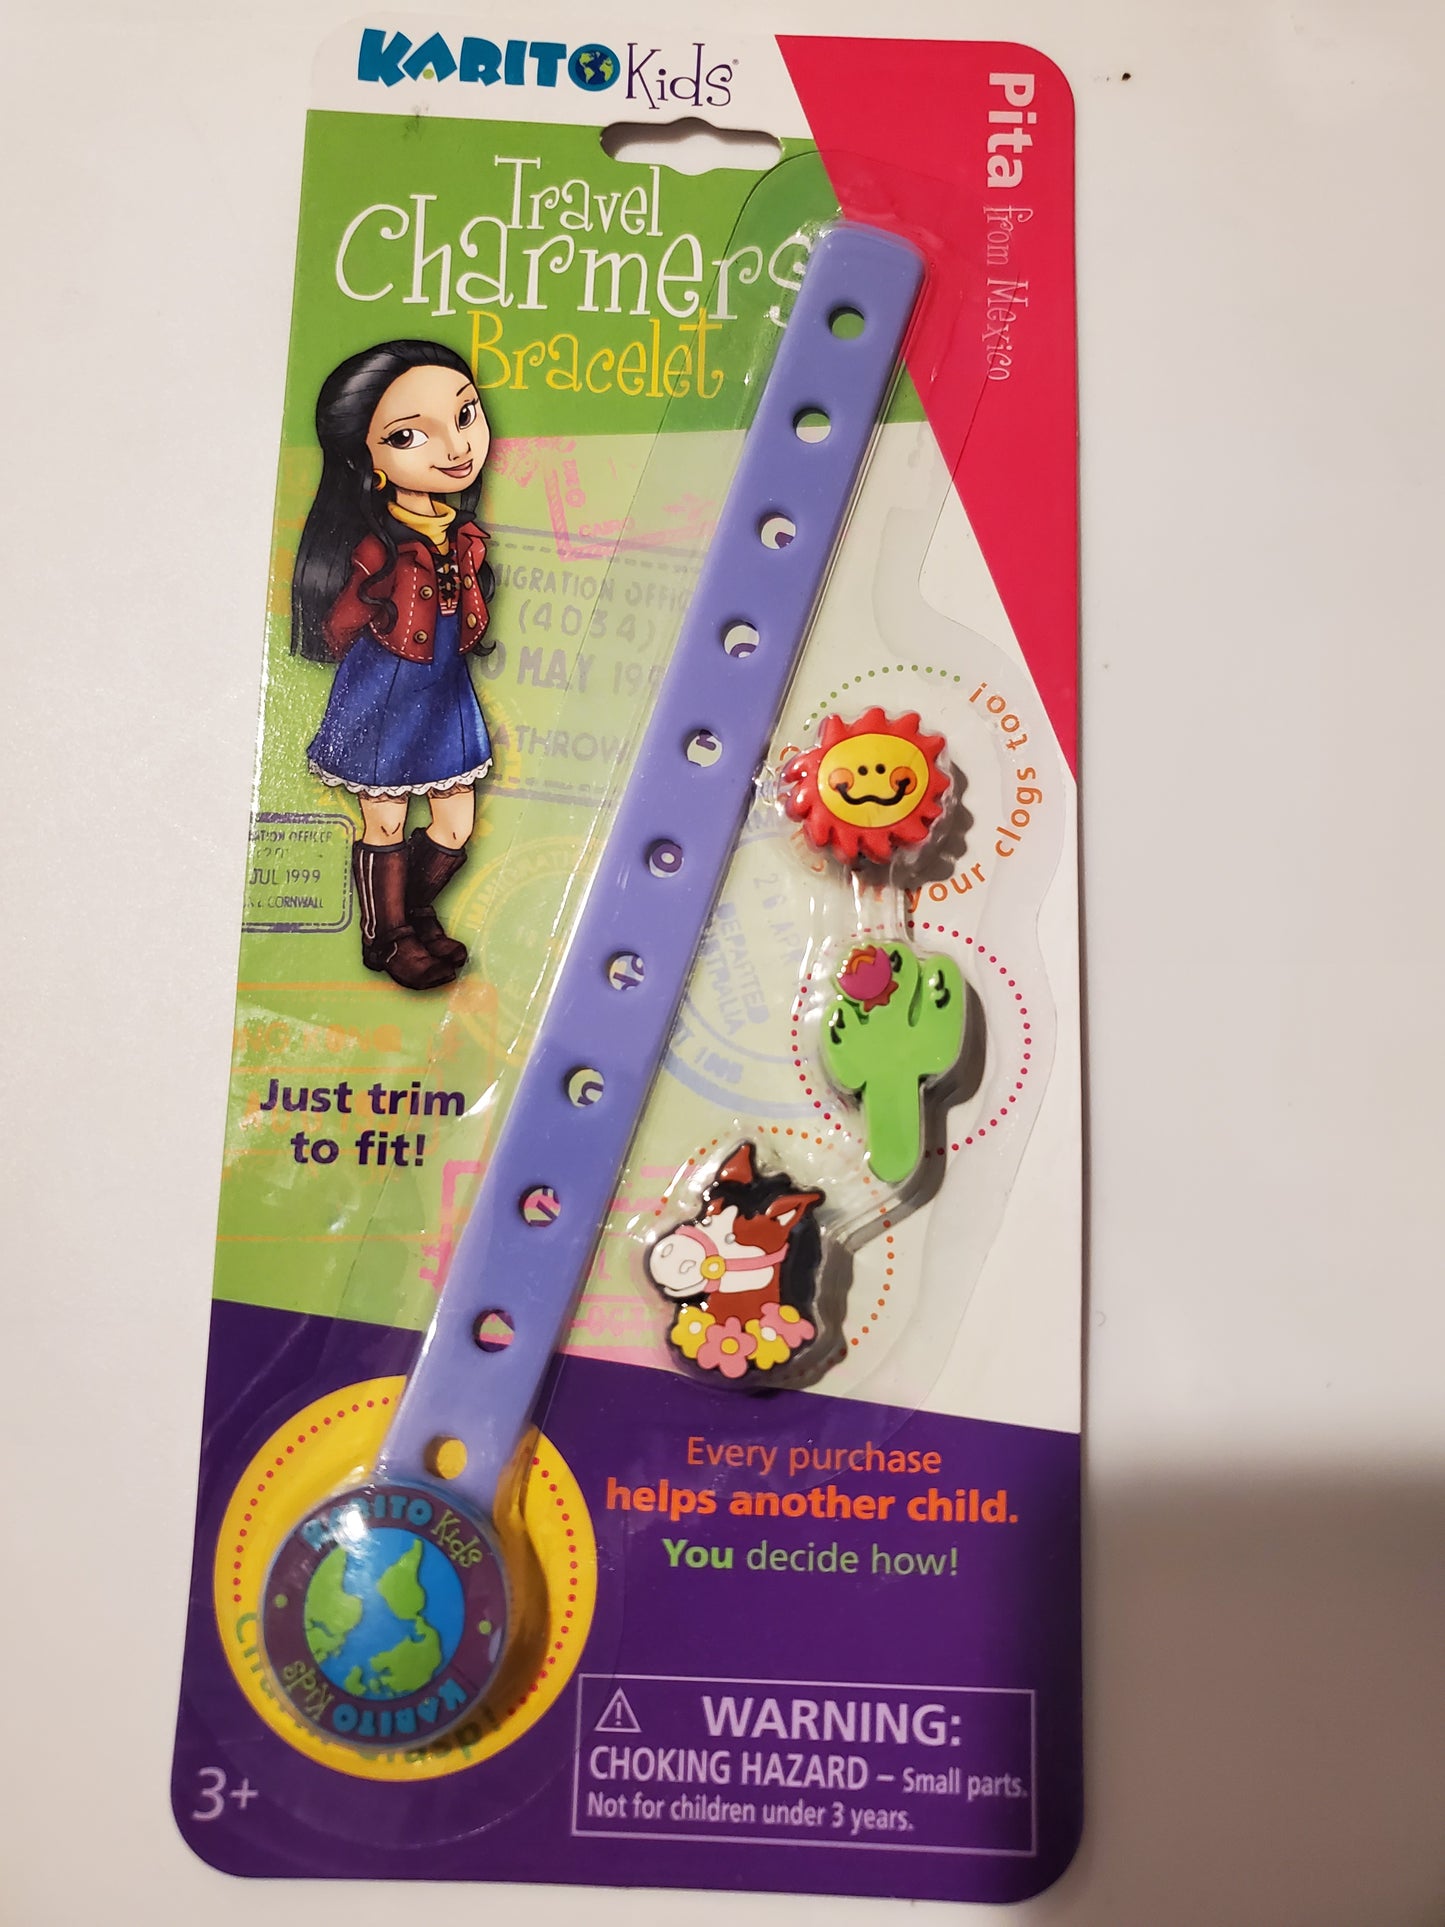 Karito Kids Travel Charmers Bracelet - Mint in Package - Pita Mexico 2008